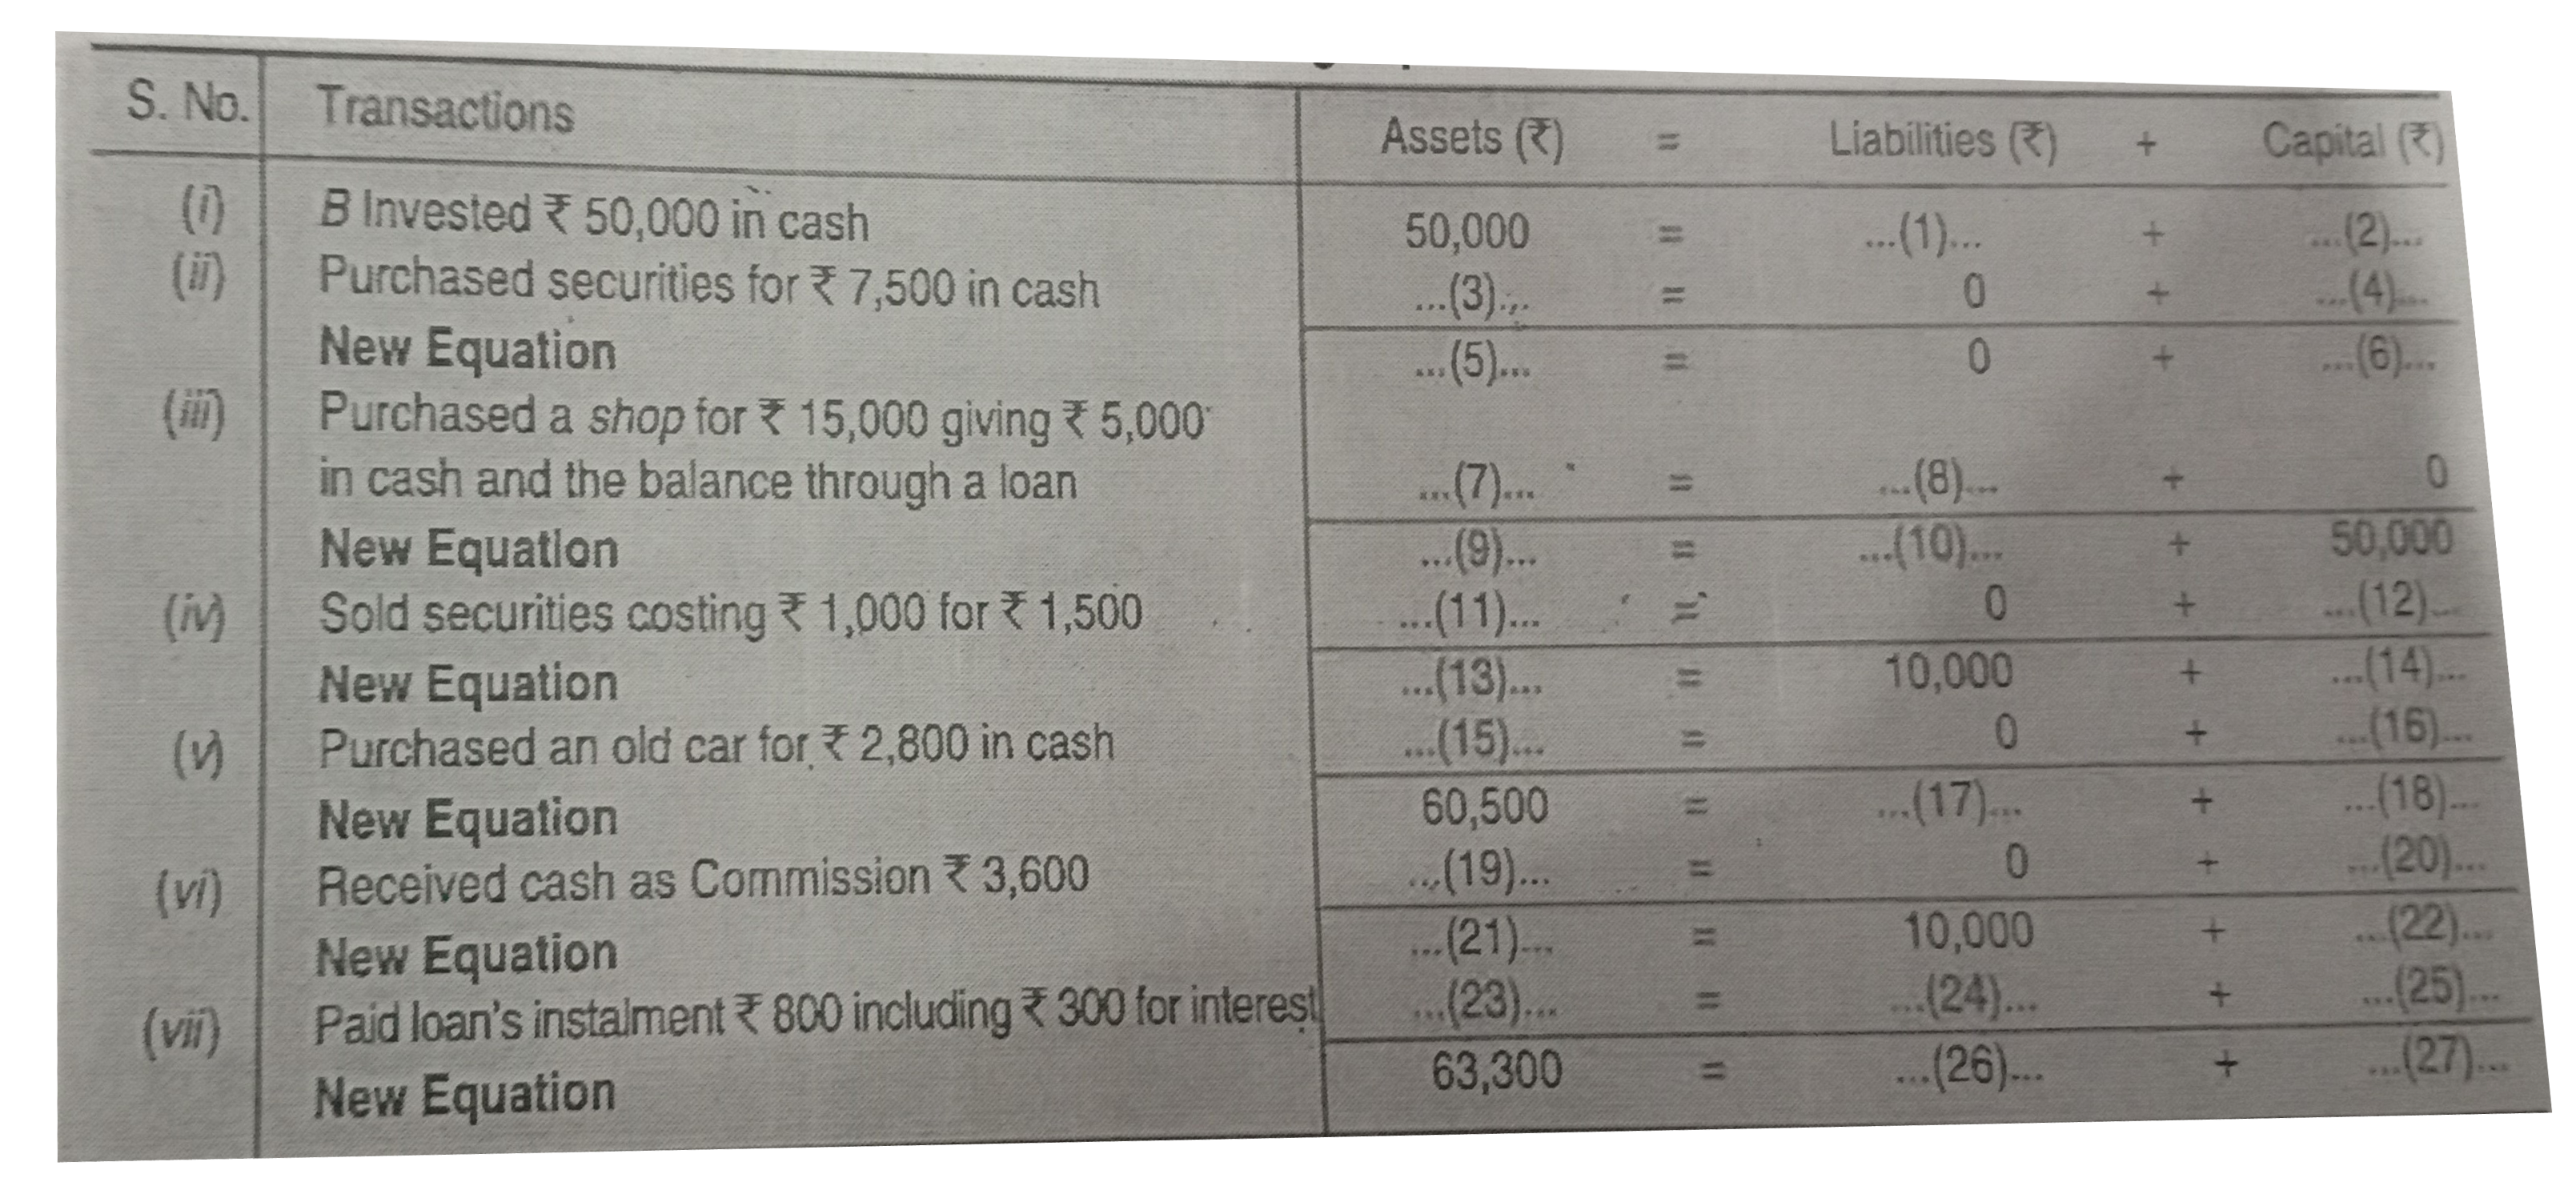 Complete the following Accounting Equation by filling the missing amounts: